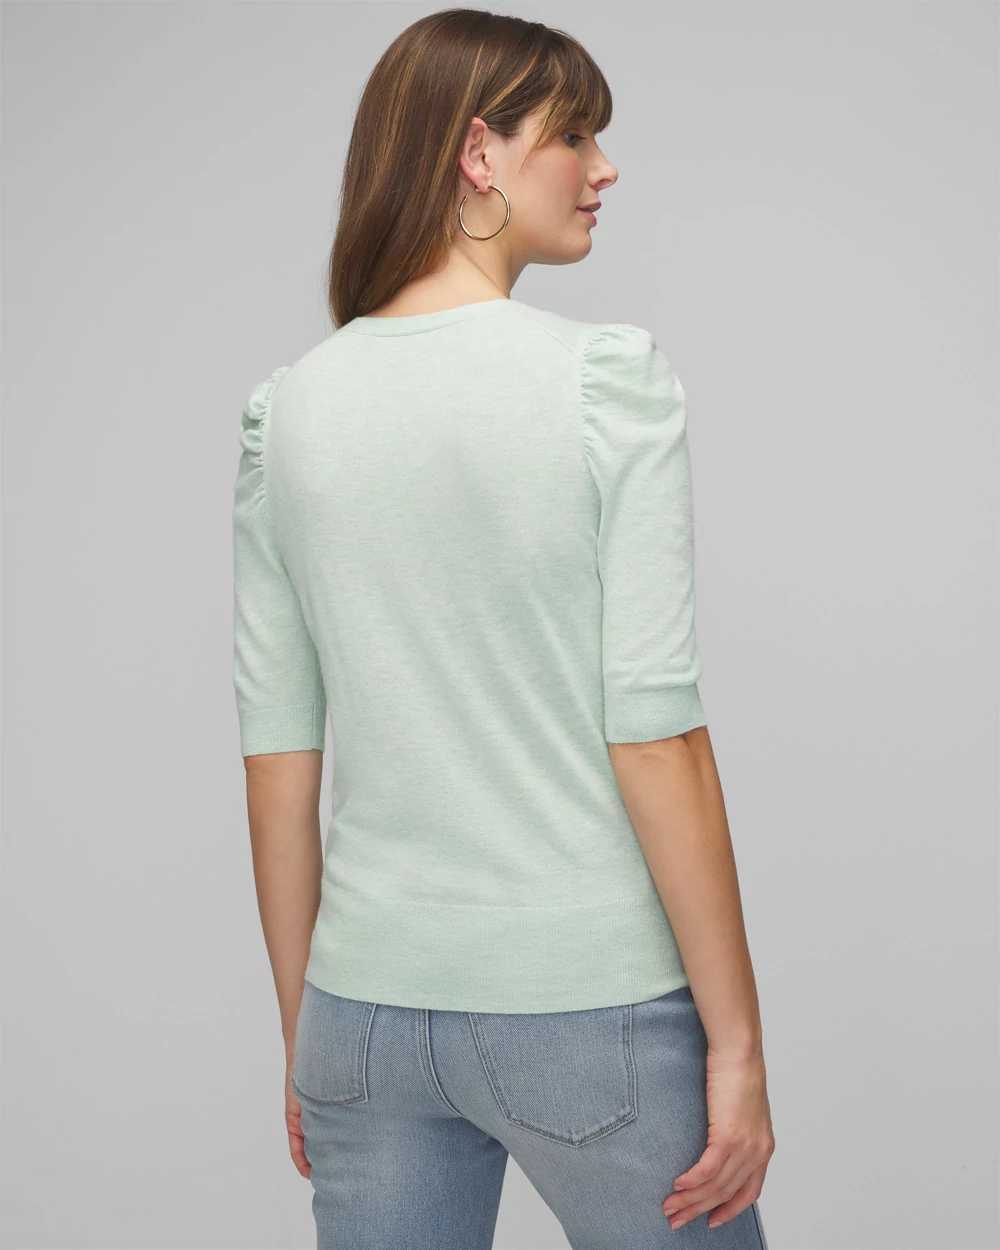 Cashmere Blend Puff Sleeve Pullover click to view larger image.